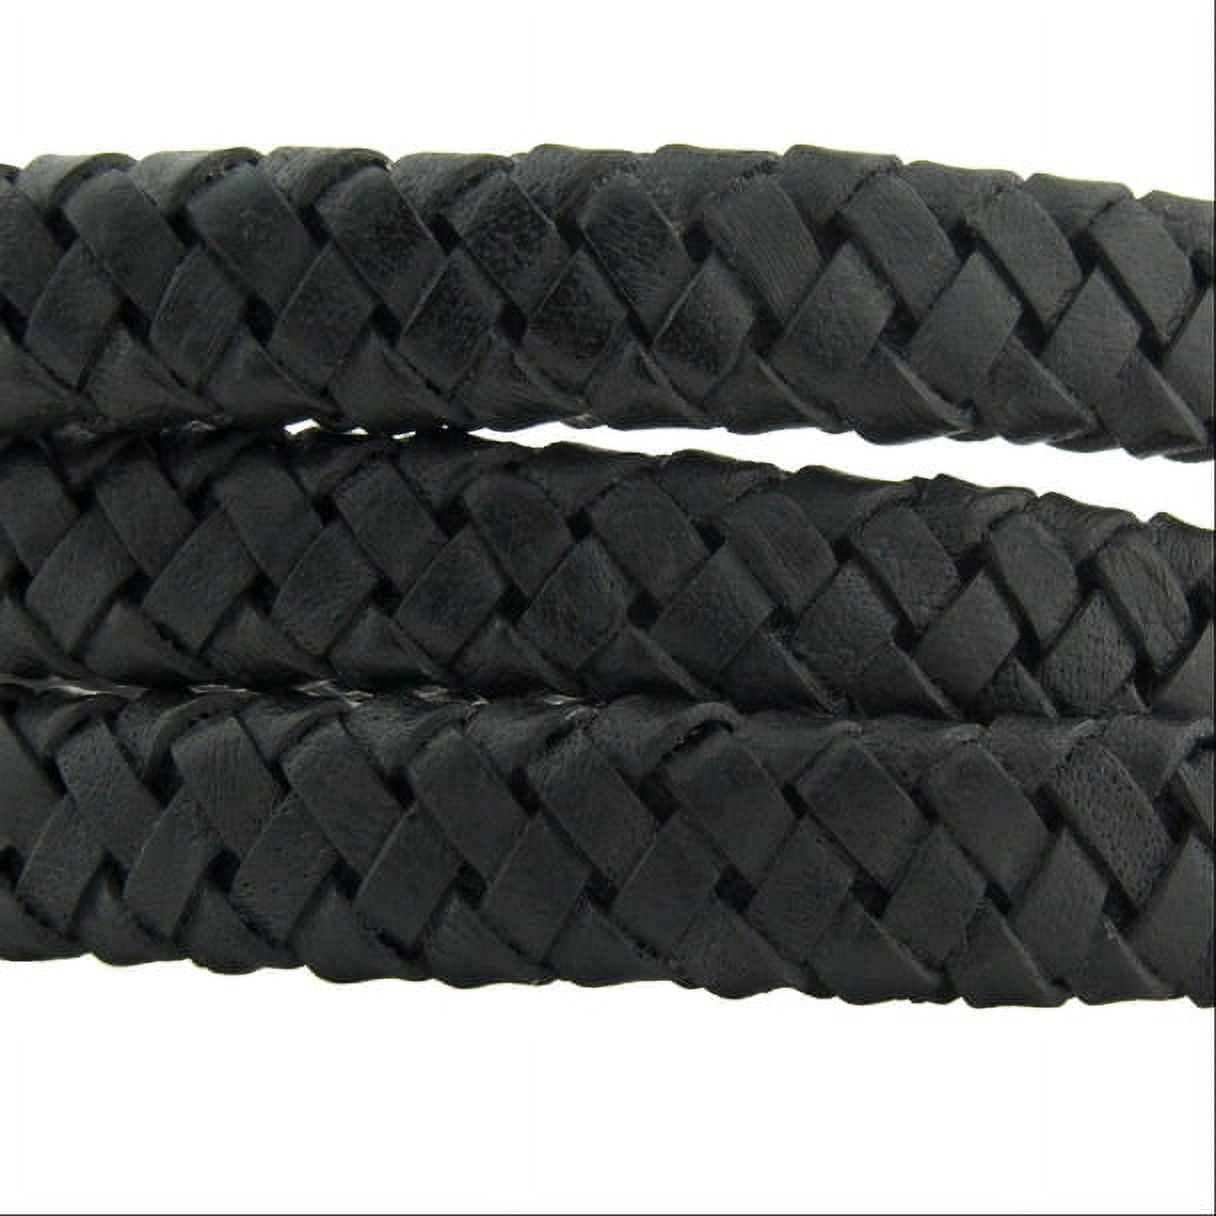 Xsotica Gypsy Kinte Flat Braided Bracelet Leather Cord 10 mm 1 Meter